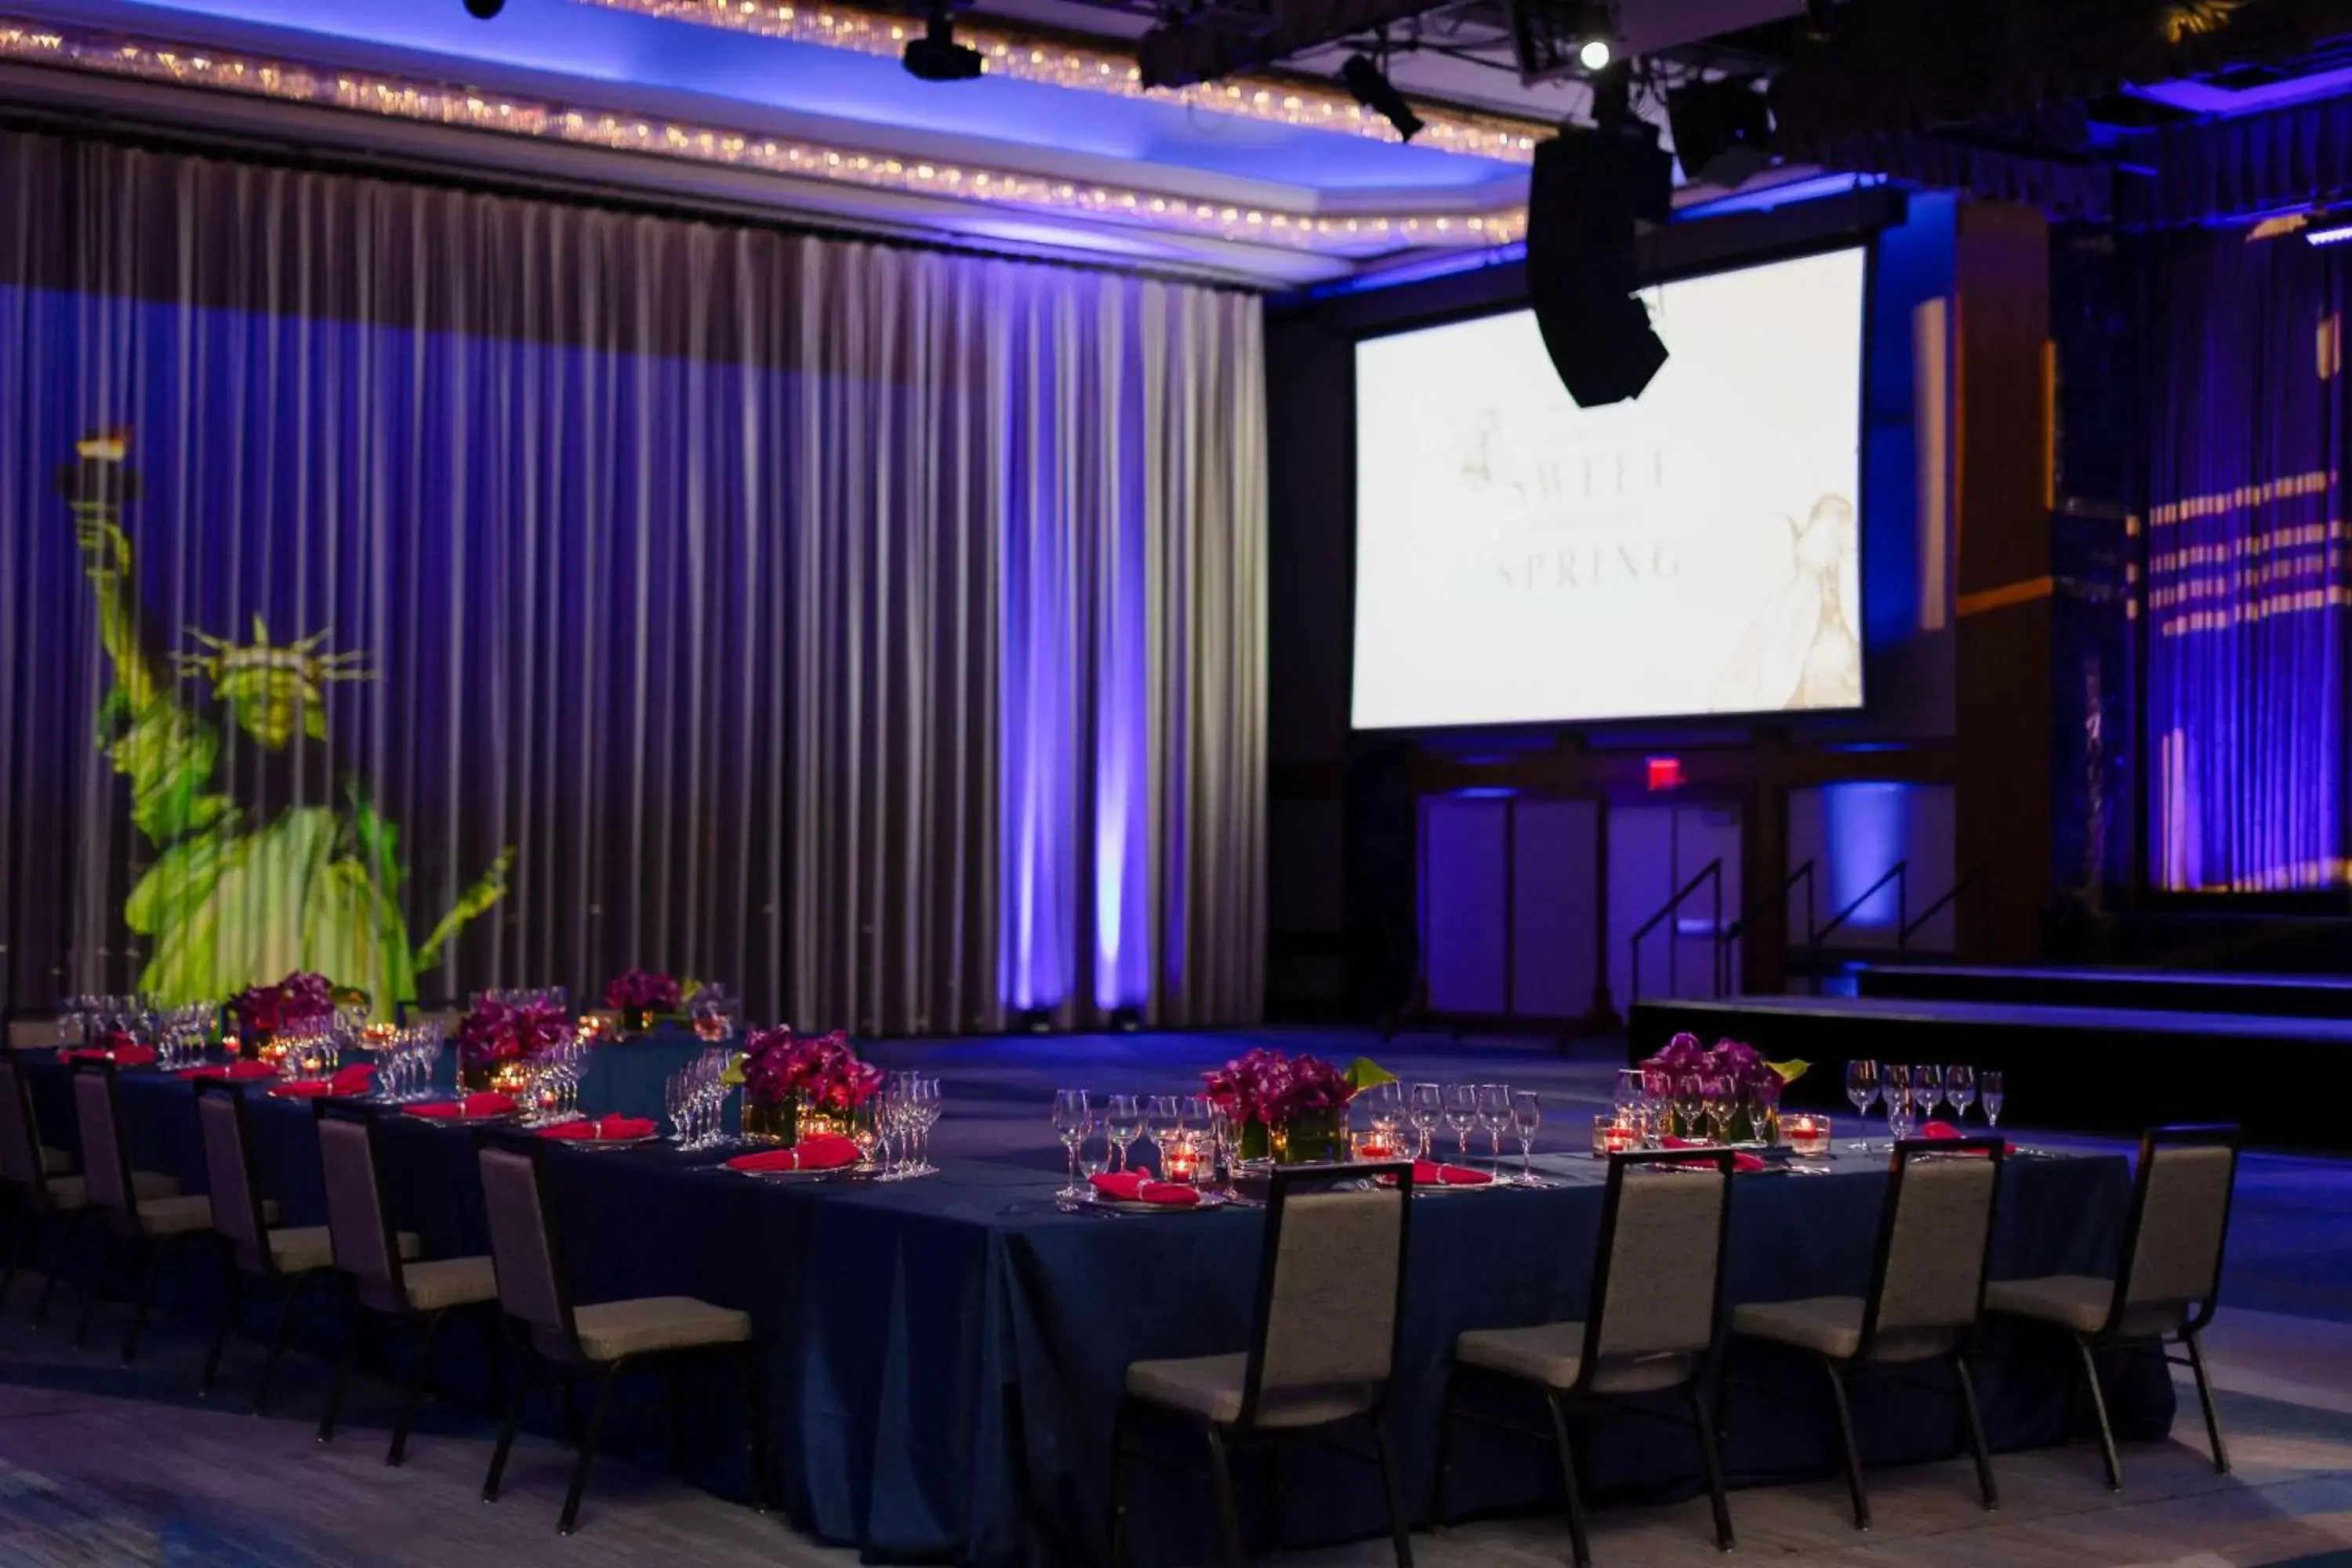 Meeting/conference room, Banquet Facilities in New York Hilton Midtown